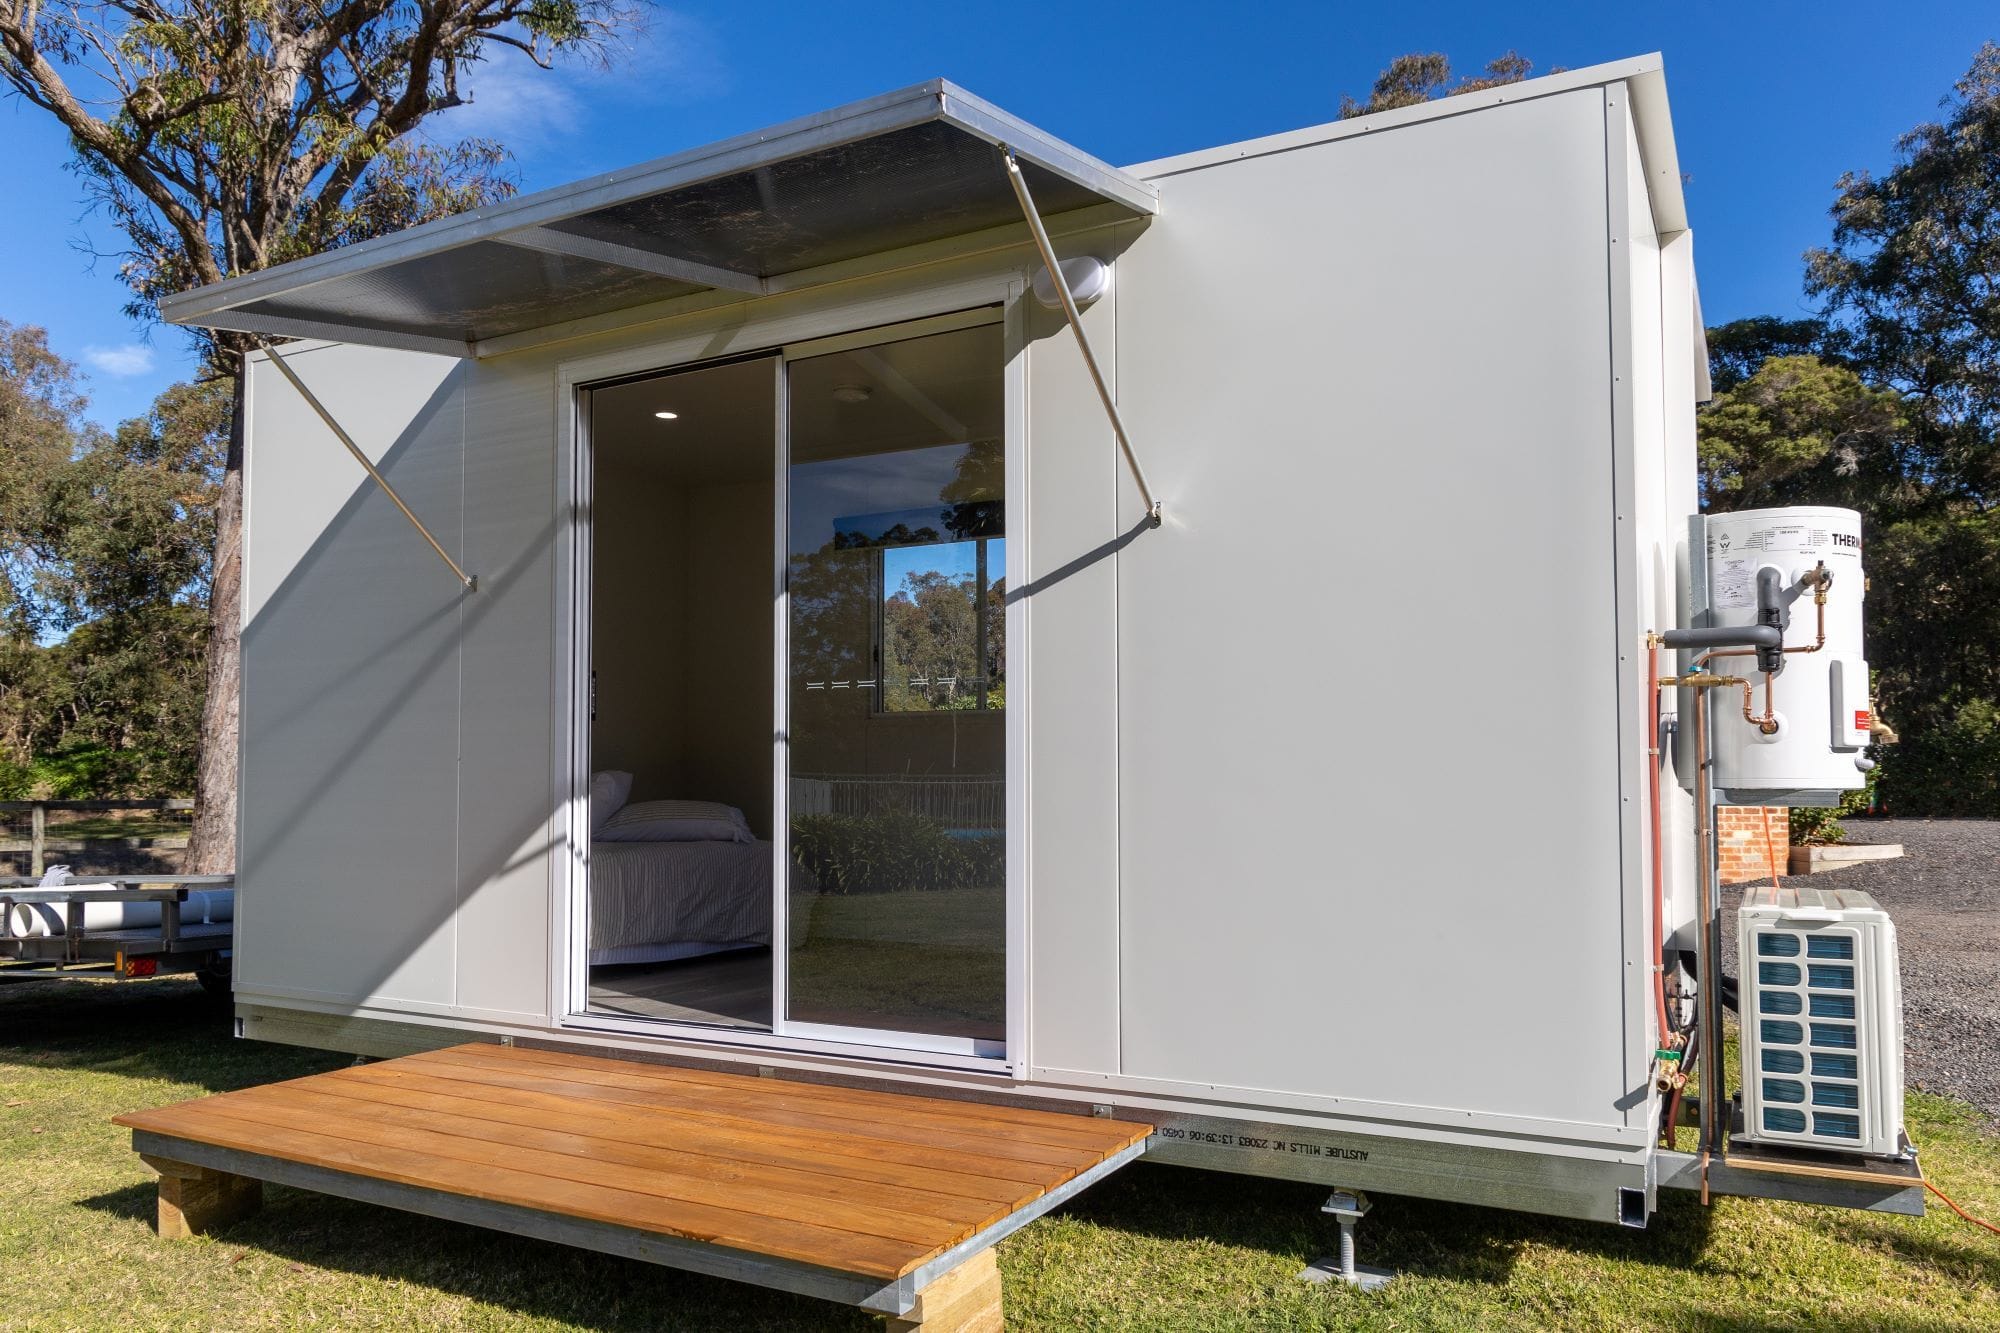 Portable Room with deck and awning